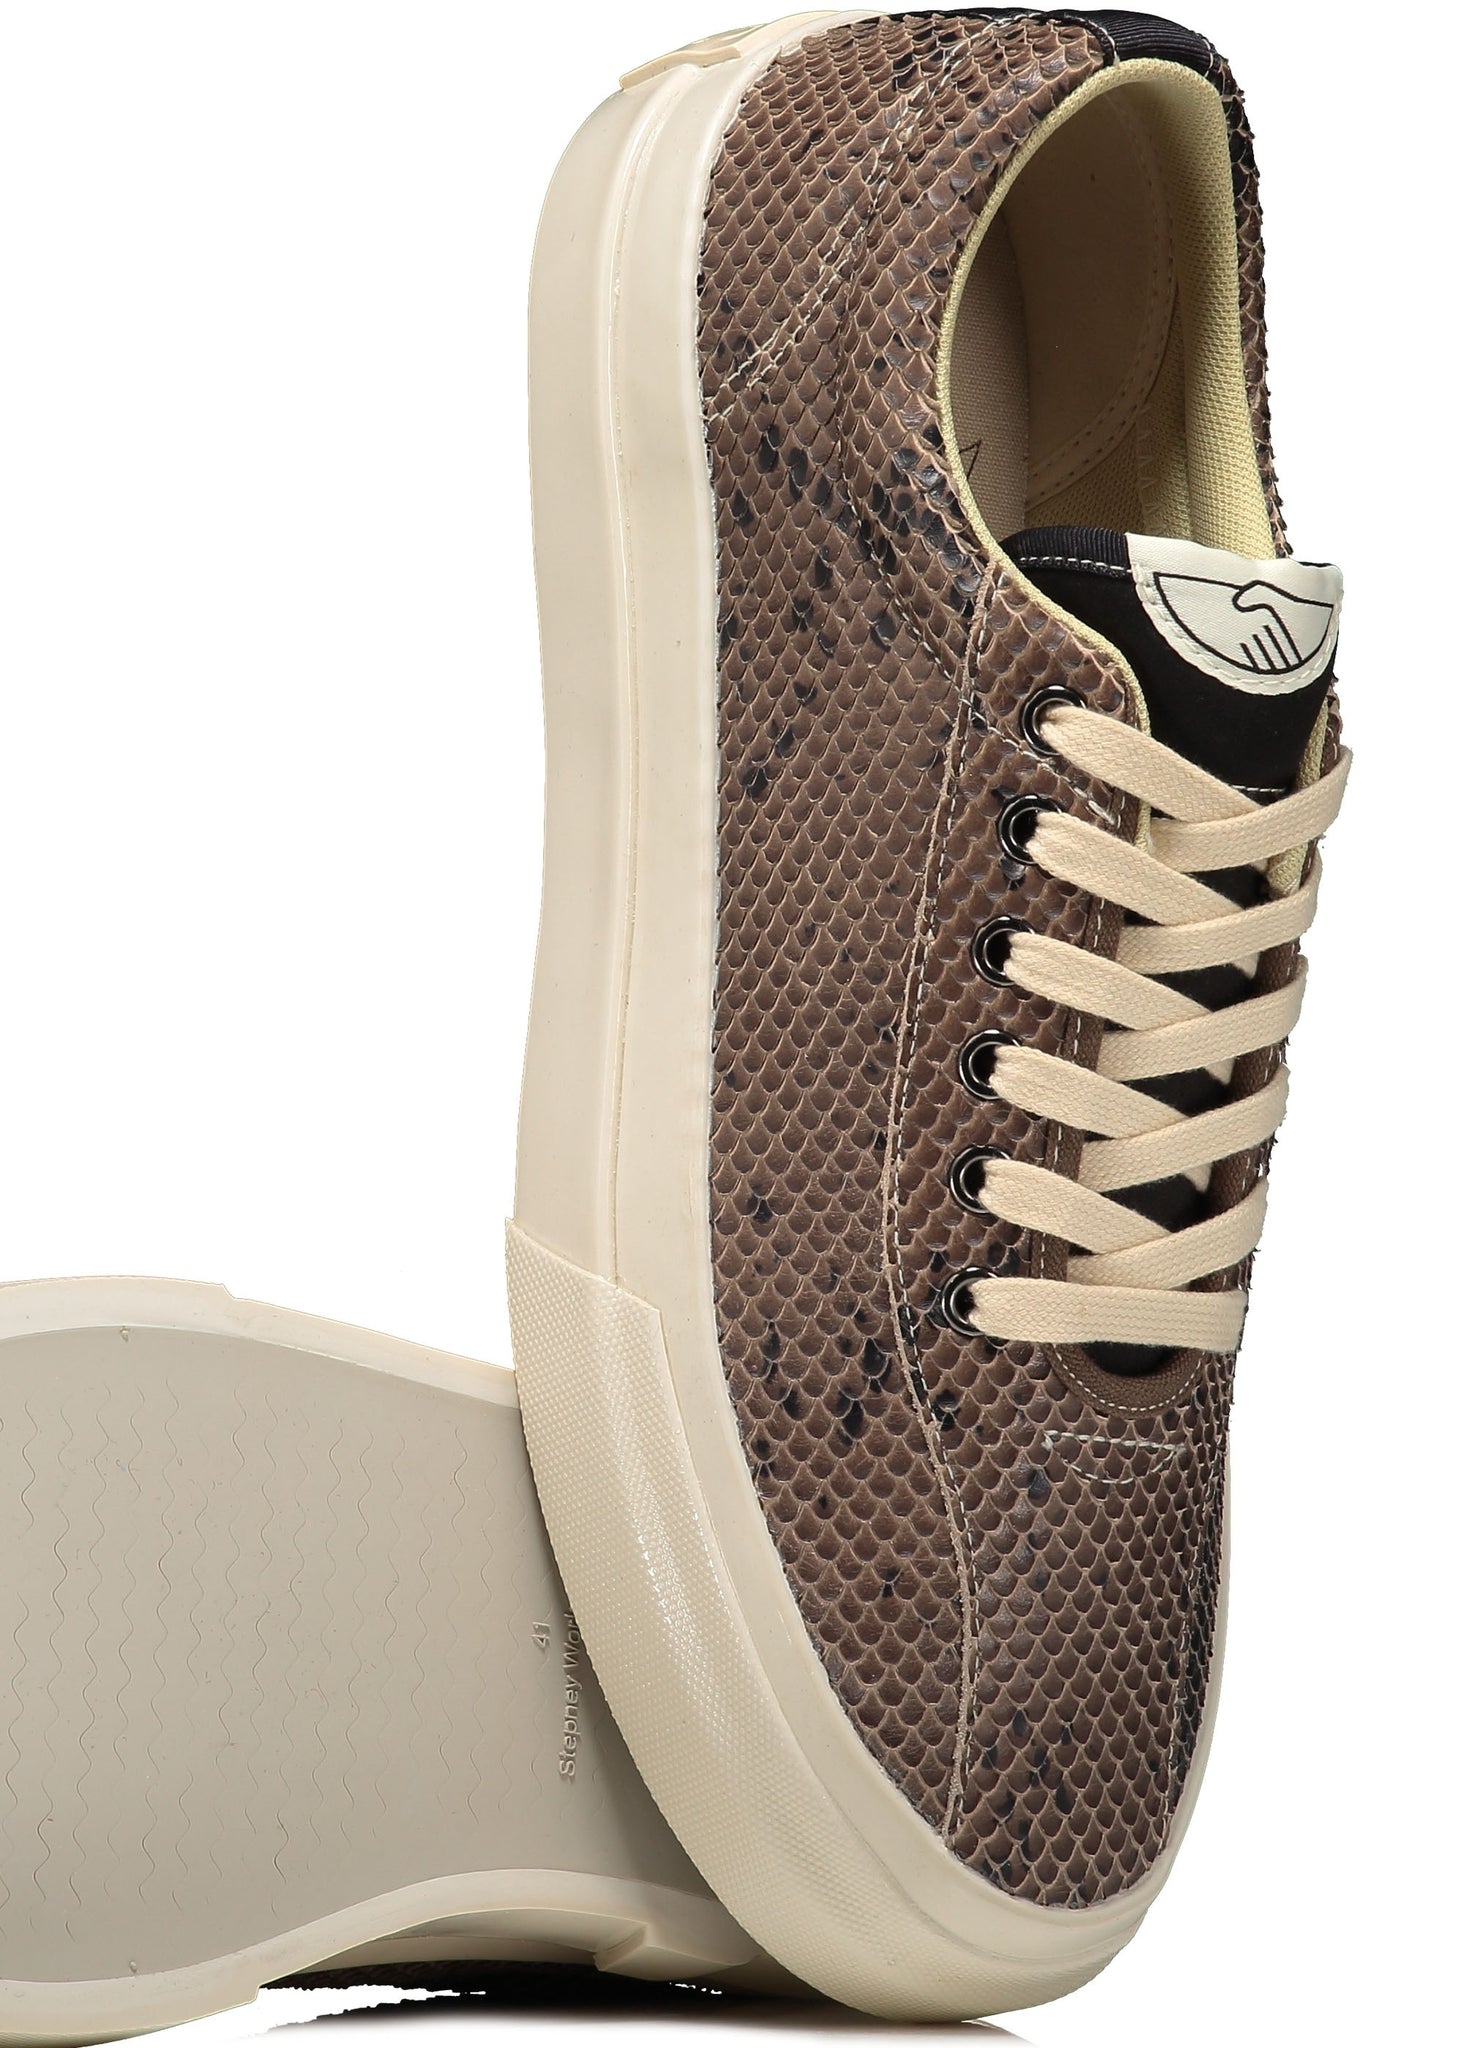 Dellow Trophy Fauna Suede - Snake